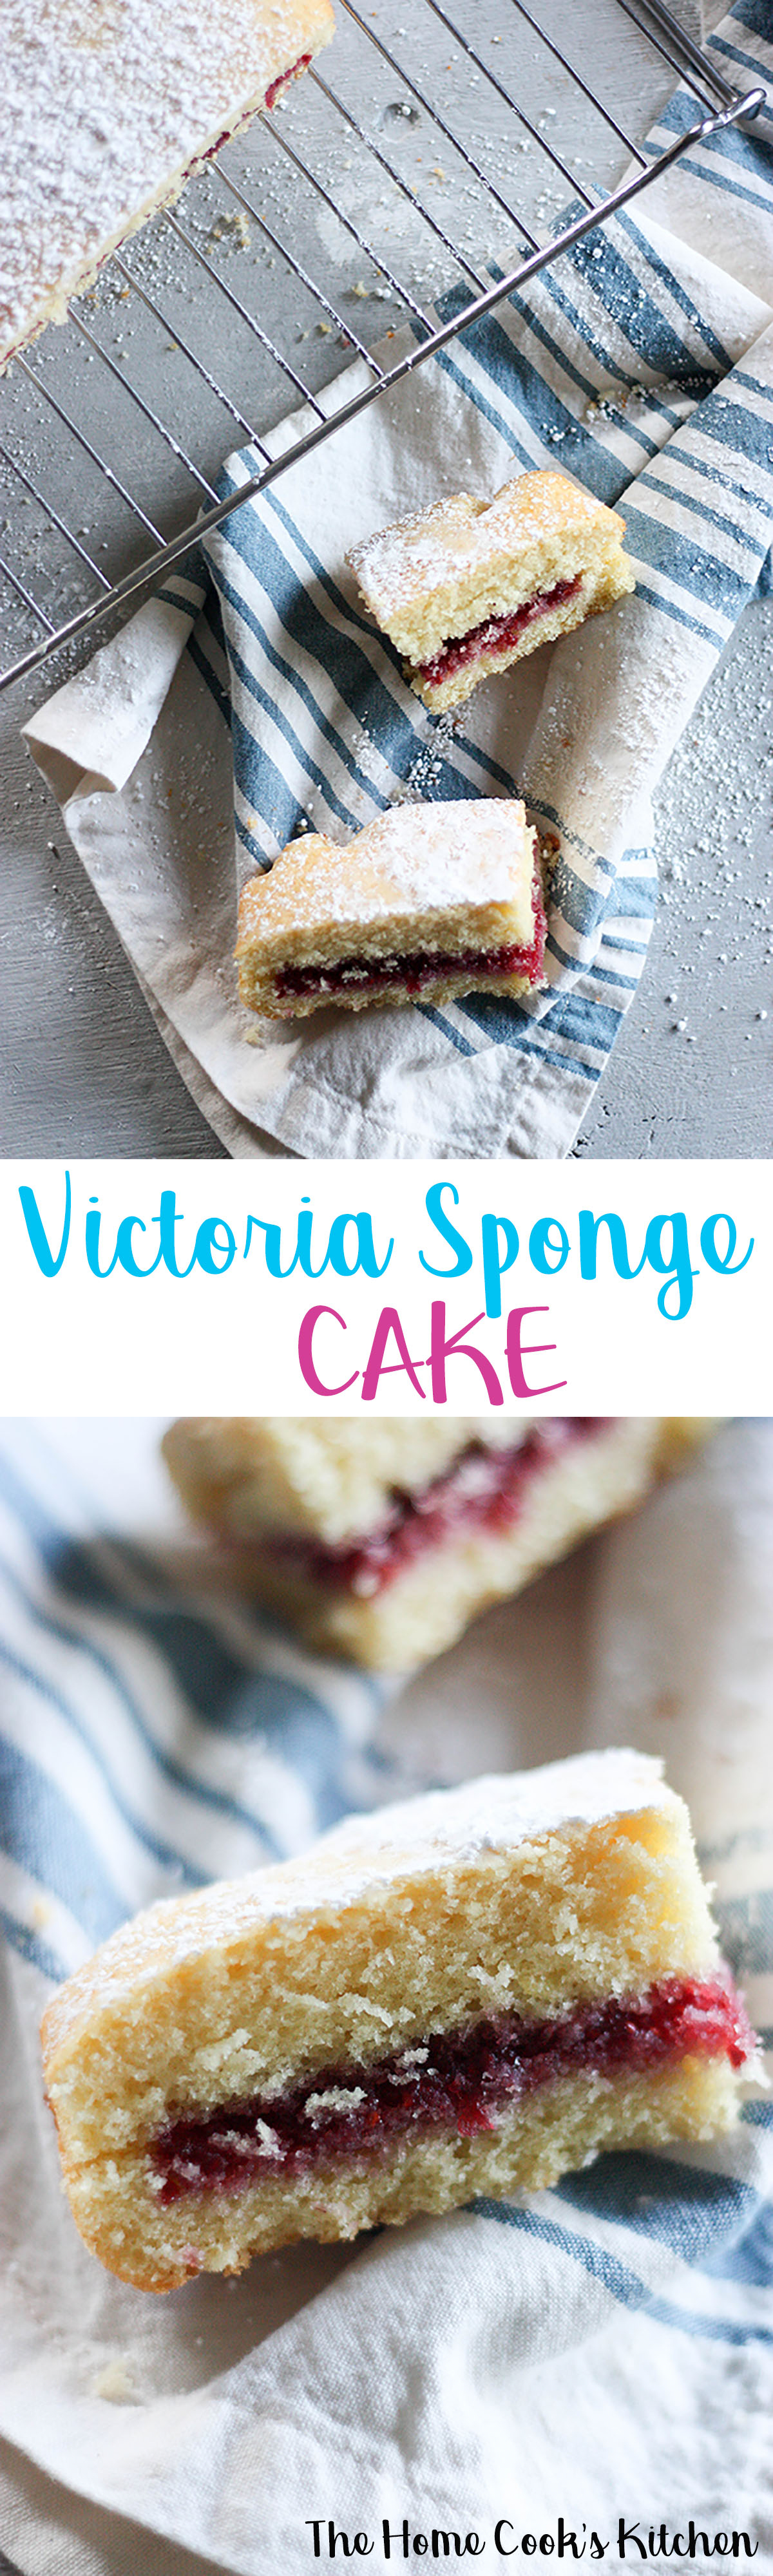 Victoria Sponge Cake www.thehomecookskitchen.com a perfect sweet treat for an afternoon tea